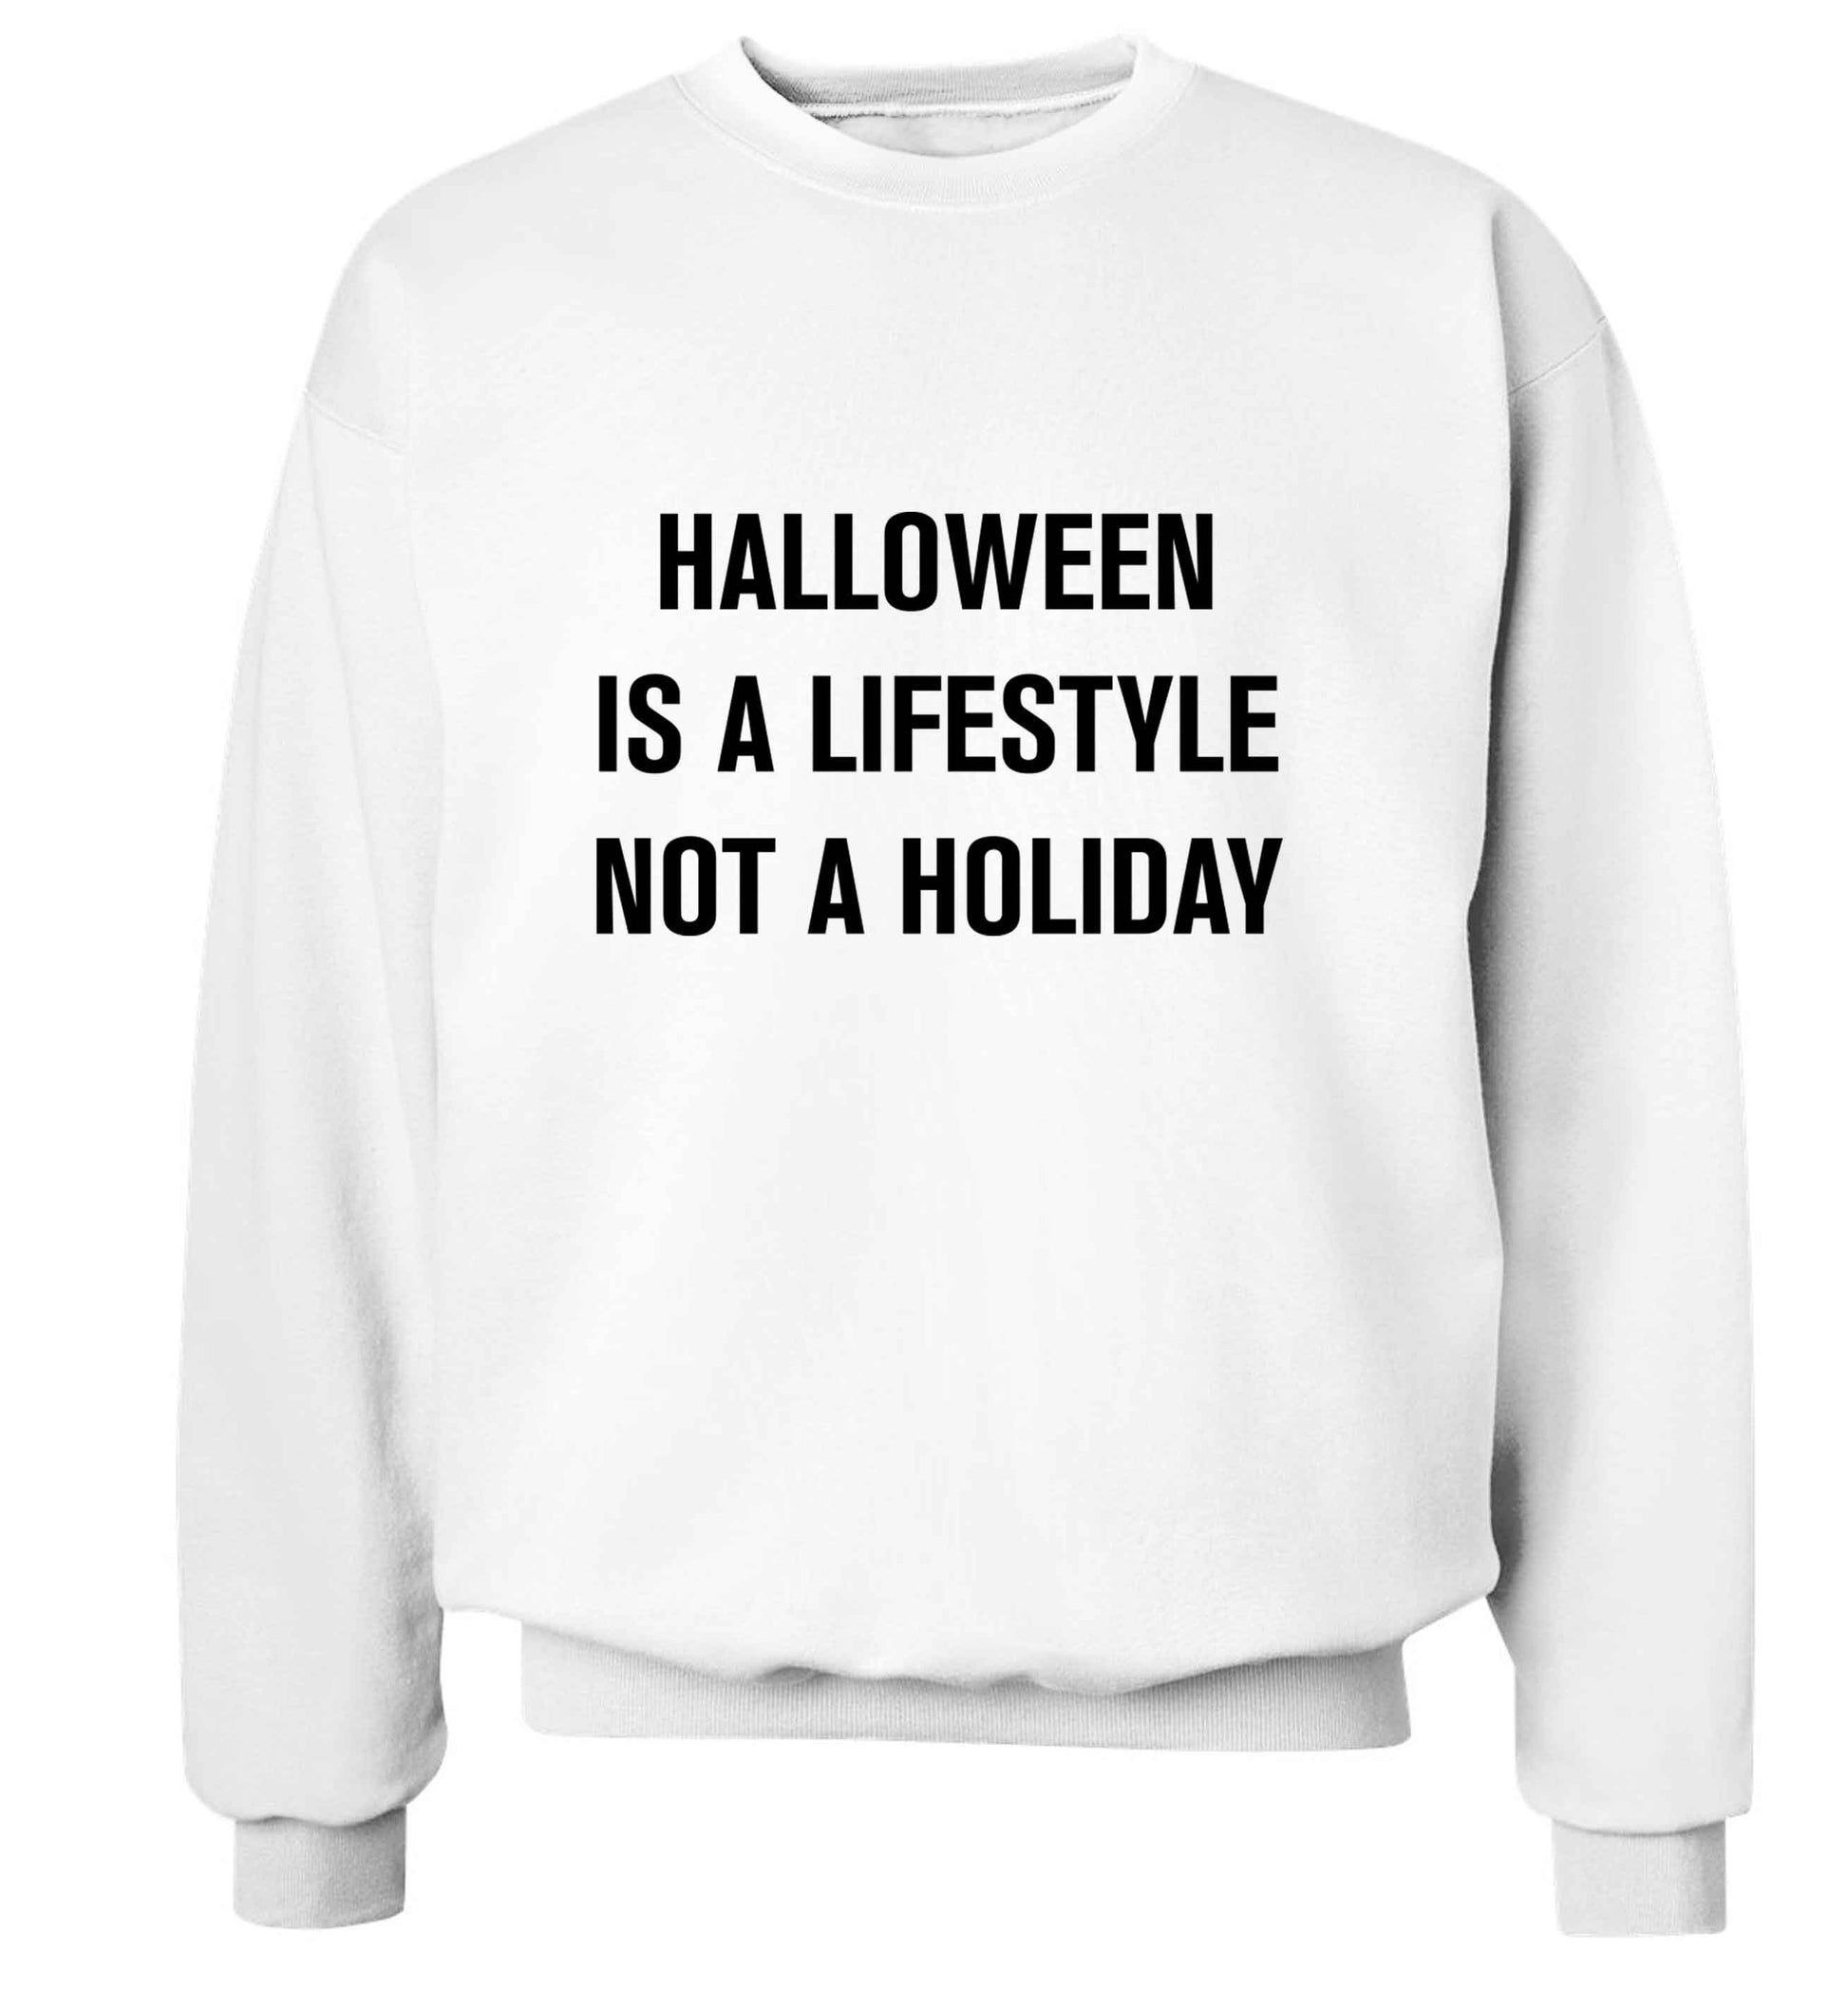 Halloween is a lifestyle not a holiday adult's unisex white sweater 2XL